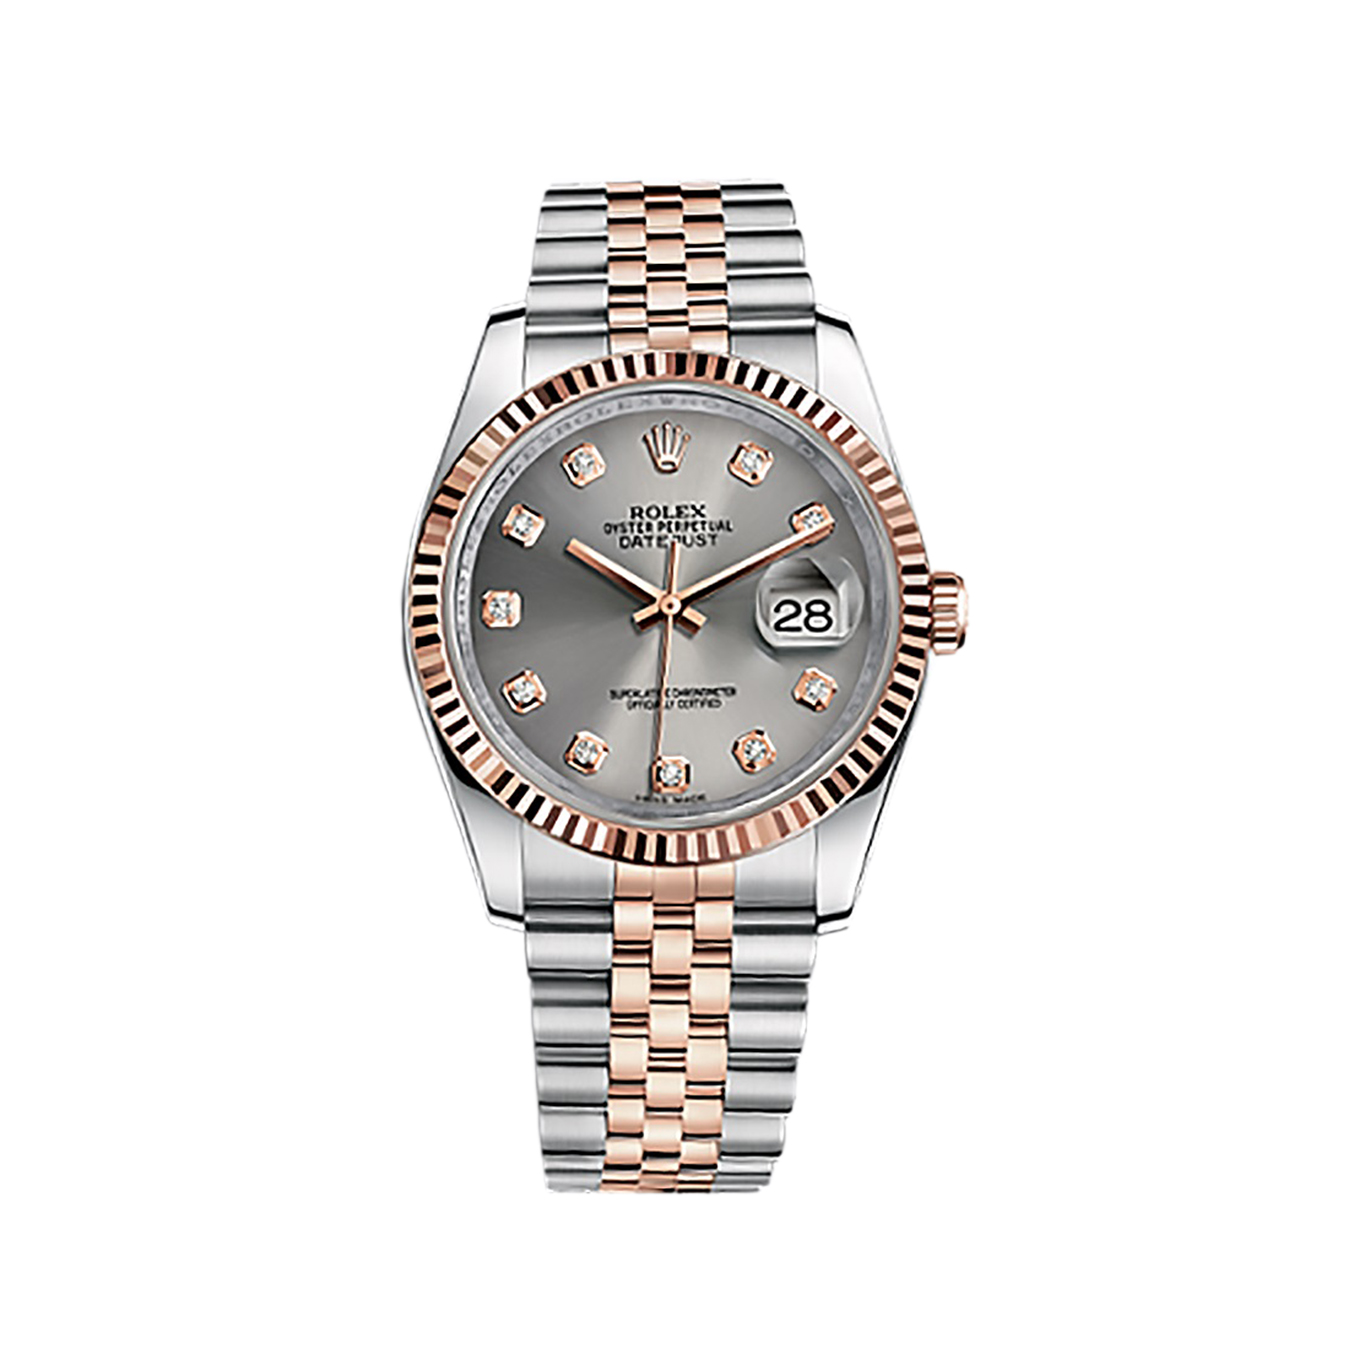 Datejust 36 116231 Rose Gold & Stainless Steel Watch (Steel Set with Diamonds) - Click Image to Close